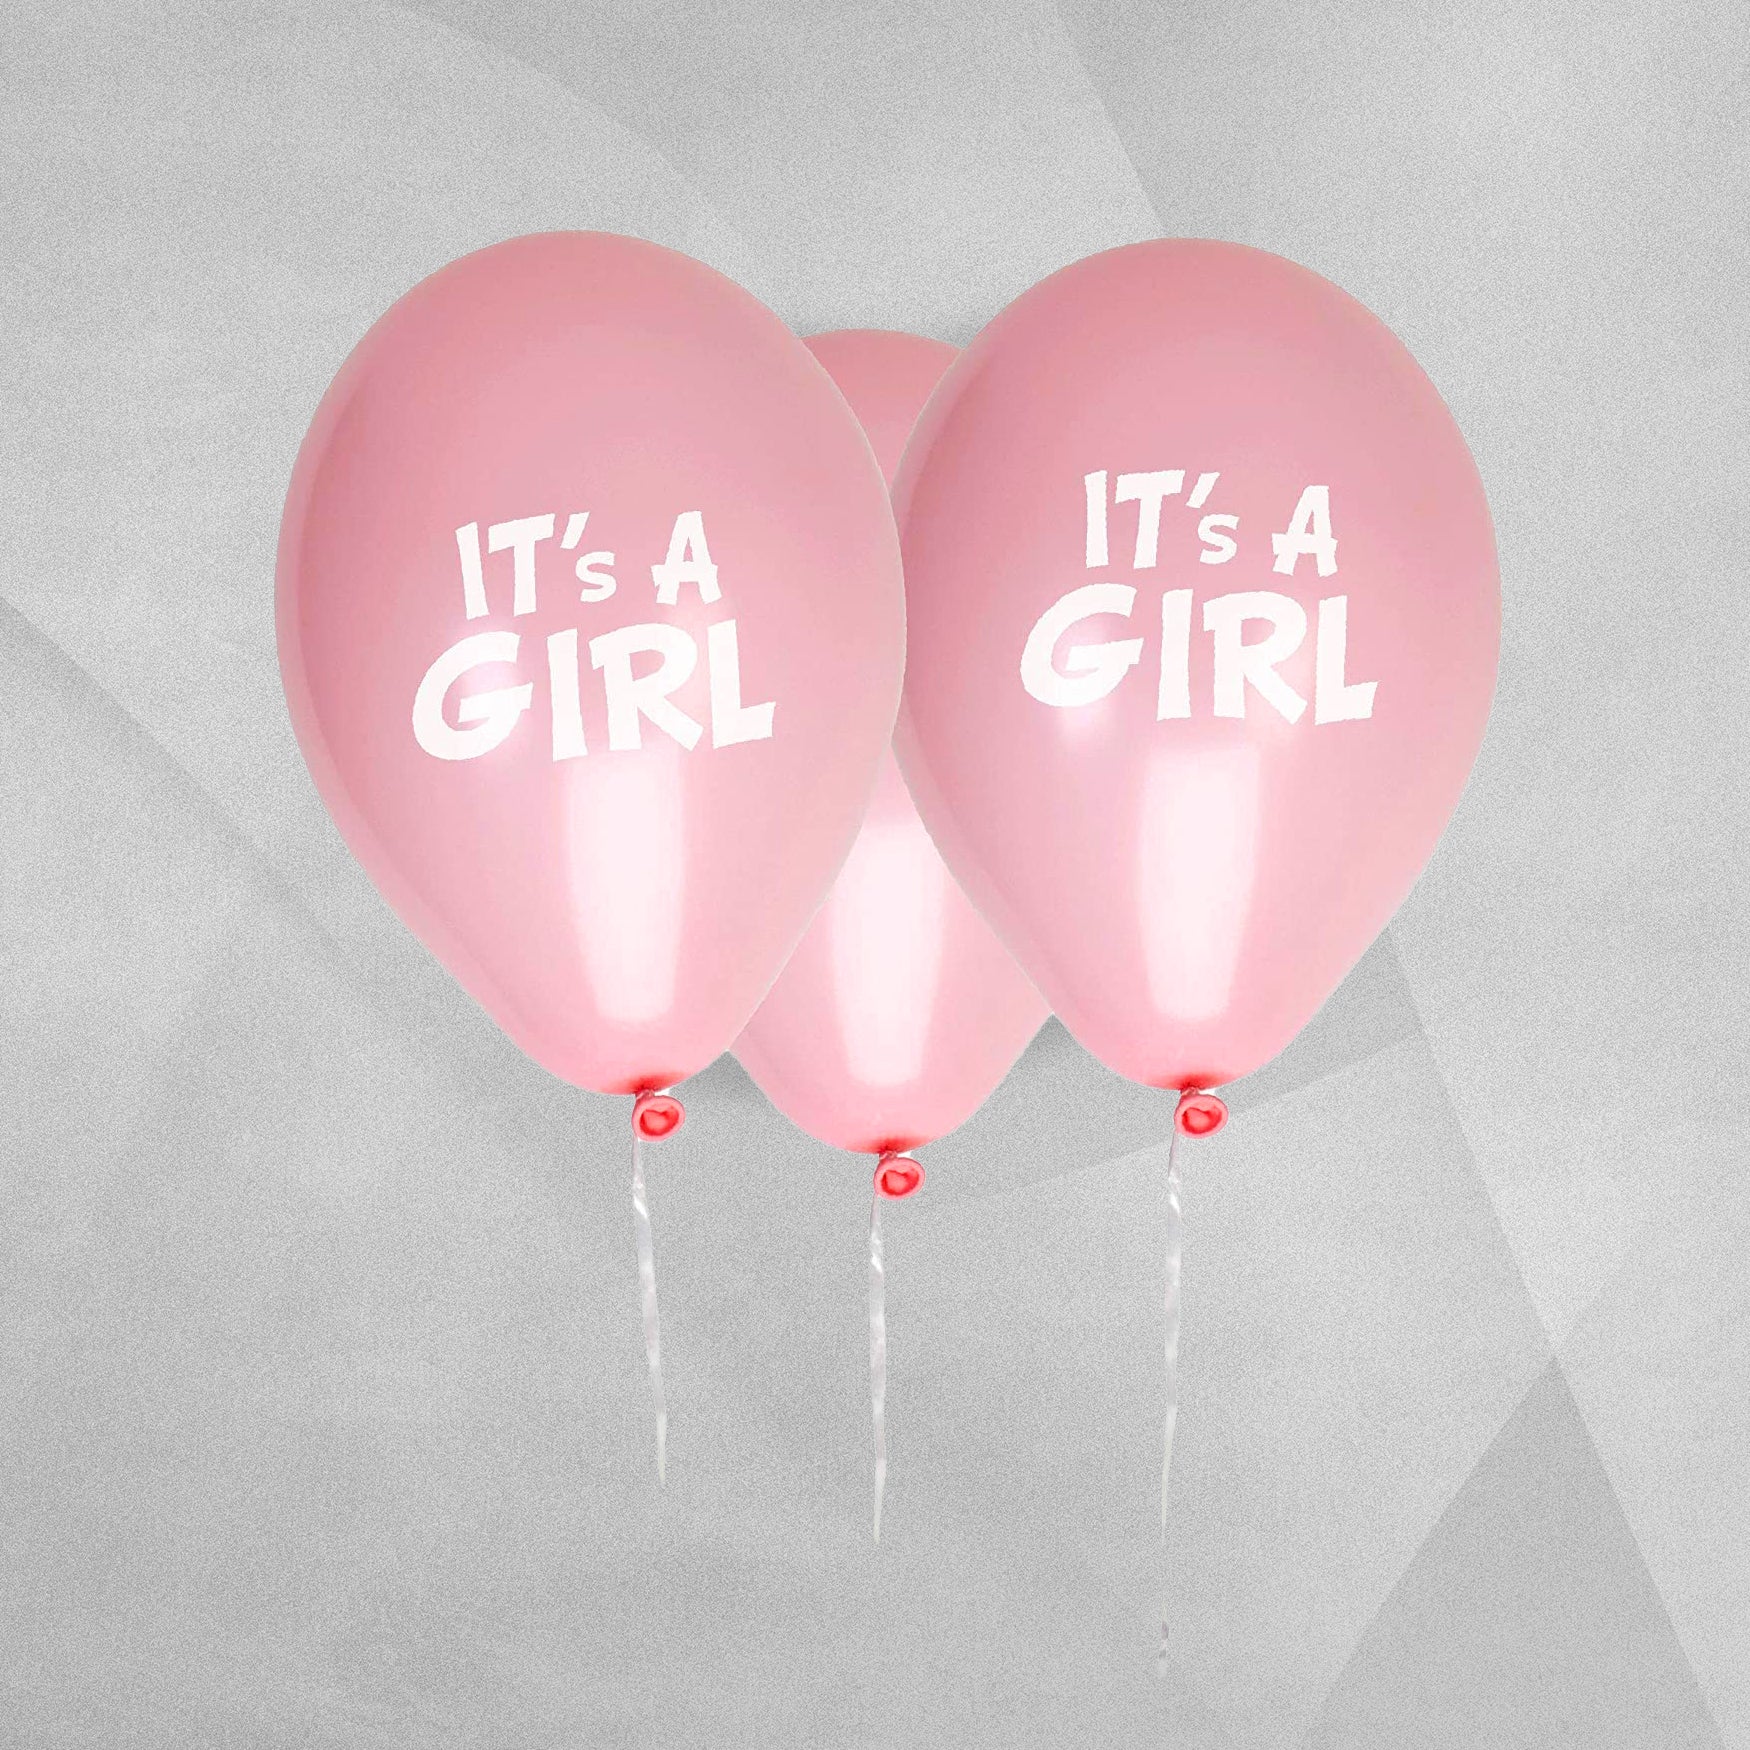 It's a Girl Baby Shower Balloons - Pink - Pack of 8